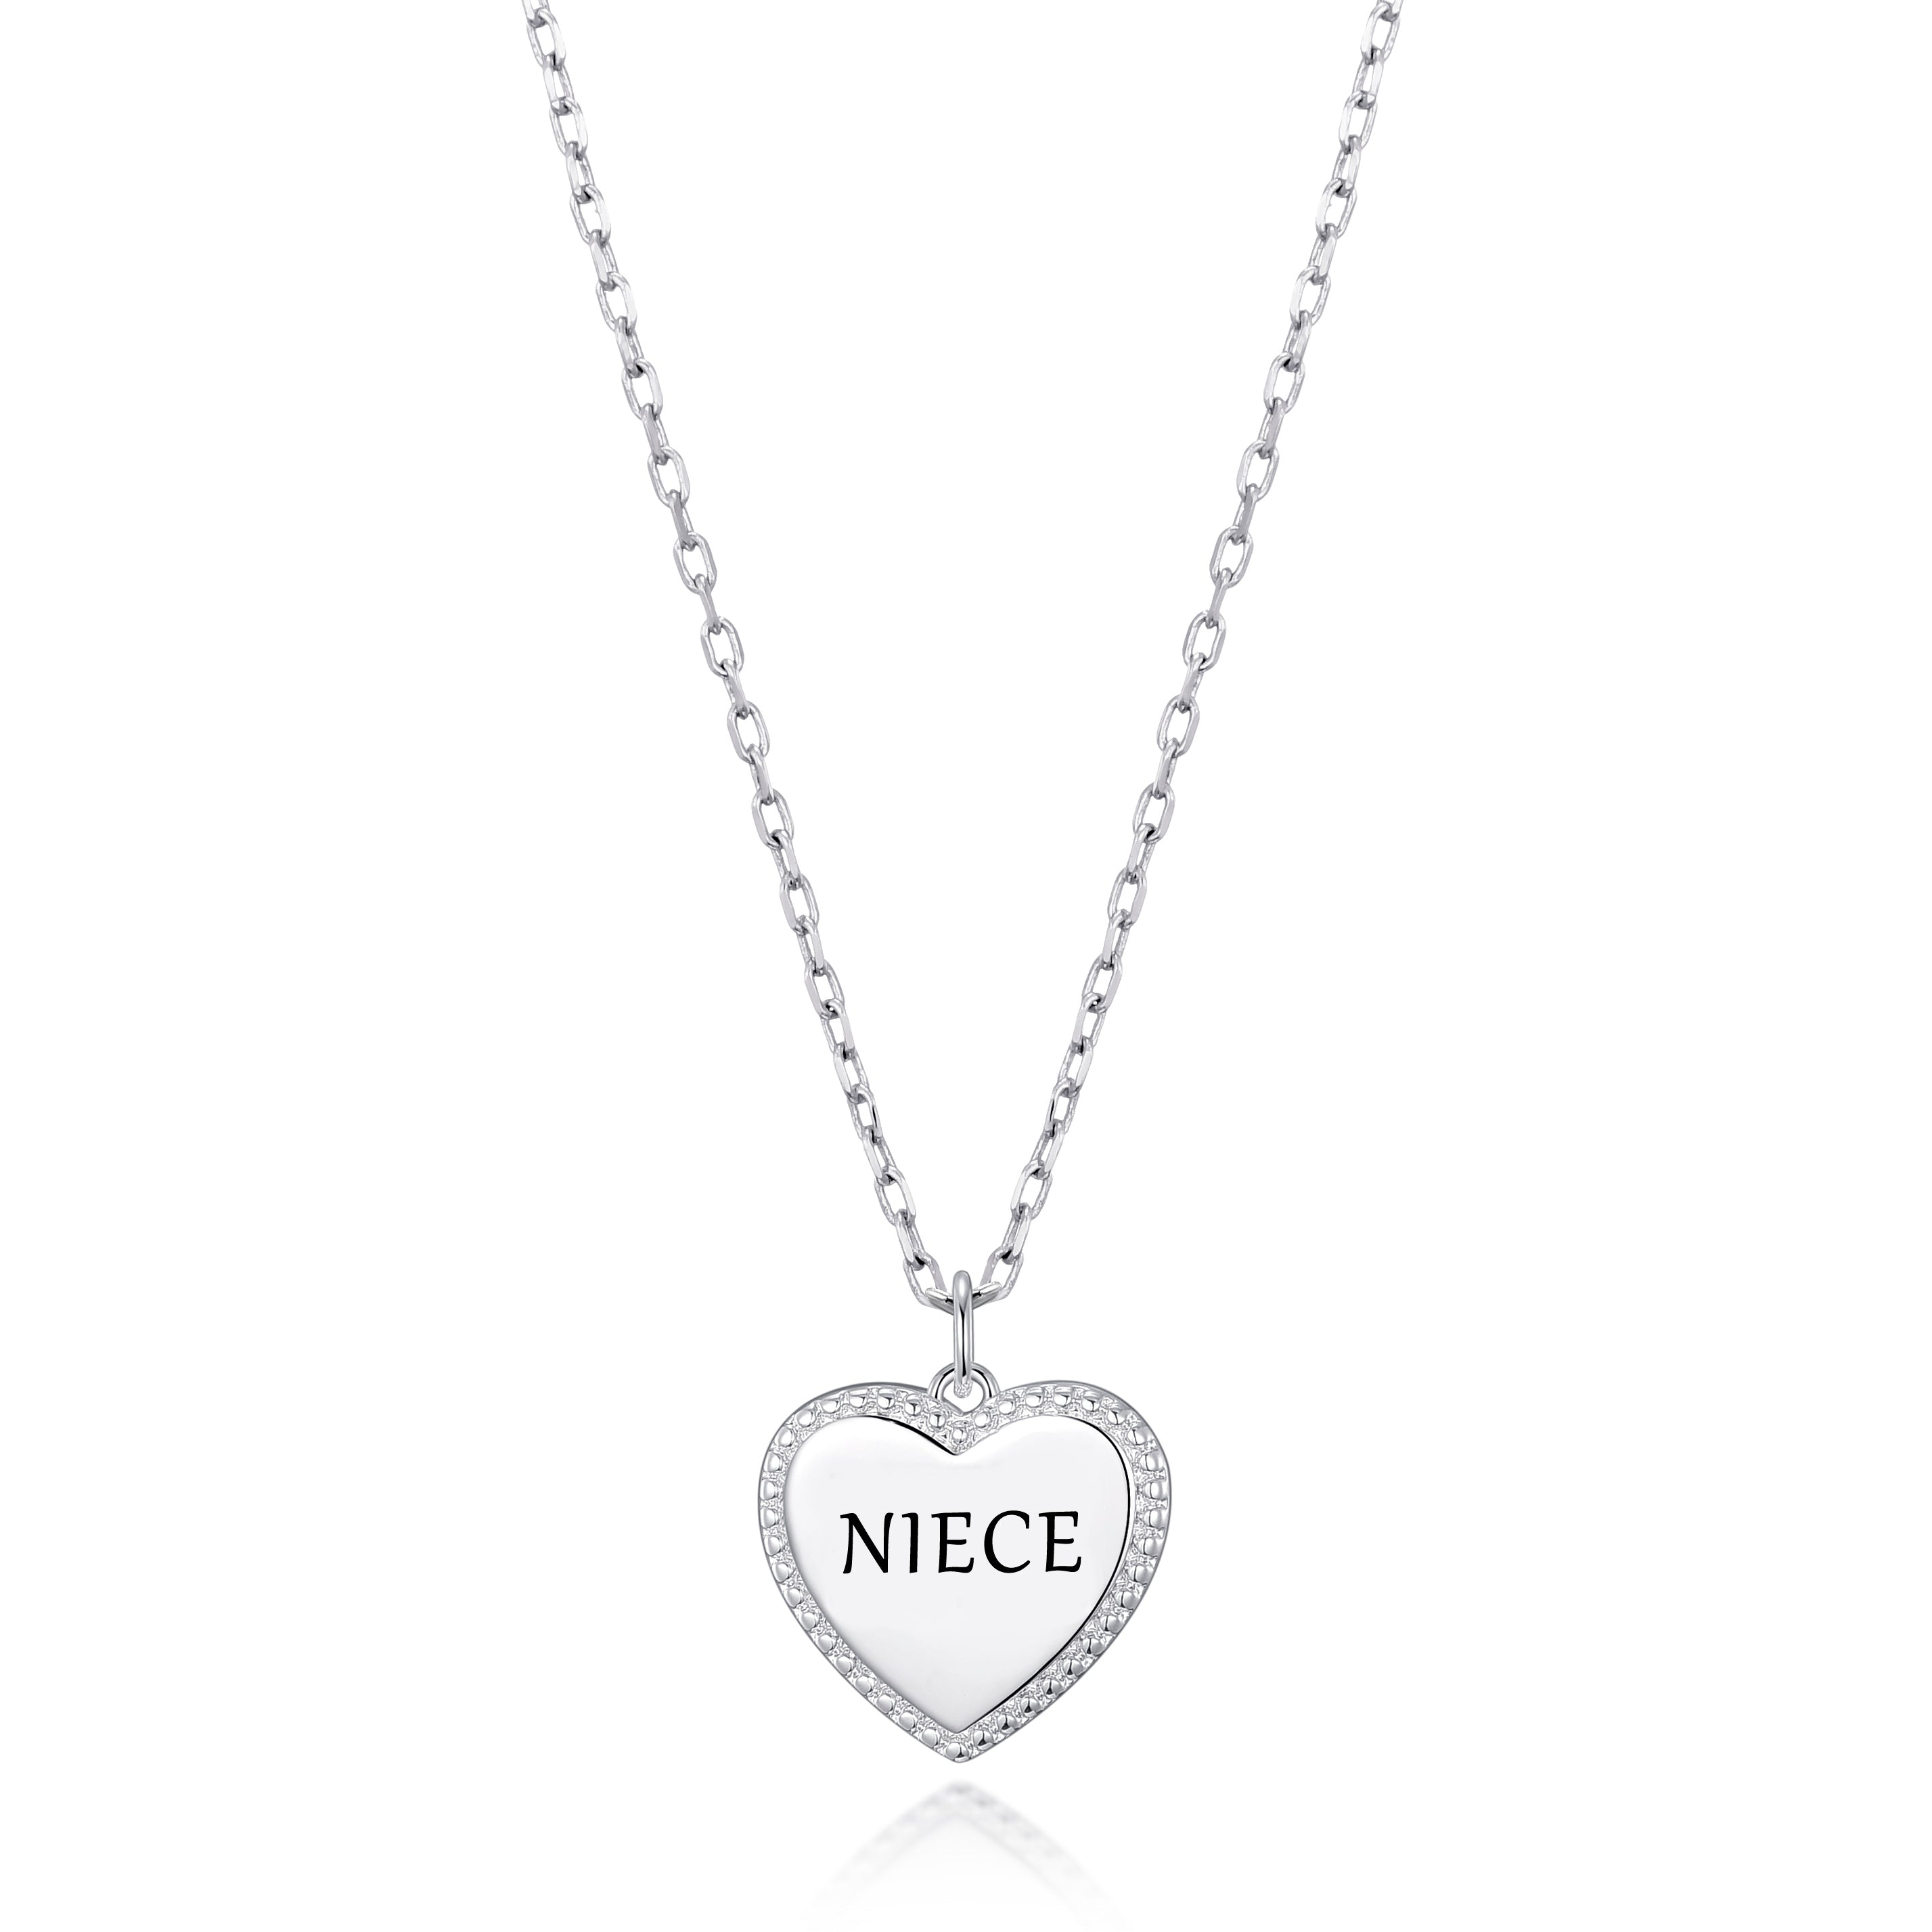 Silver Plated Filigree Heart Niece Necklace